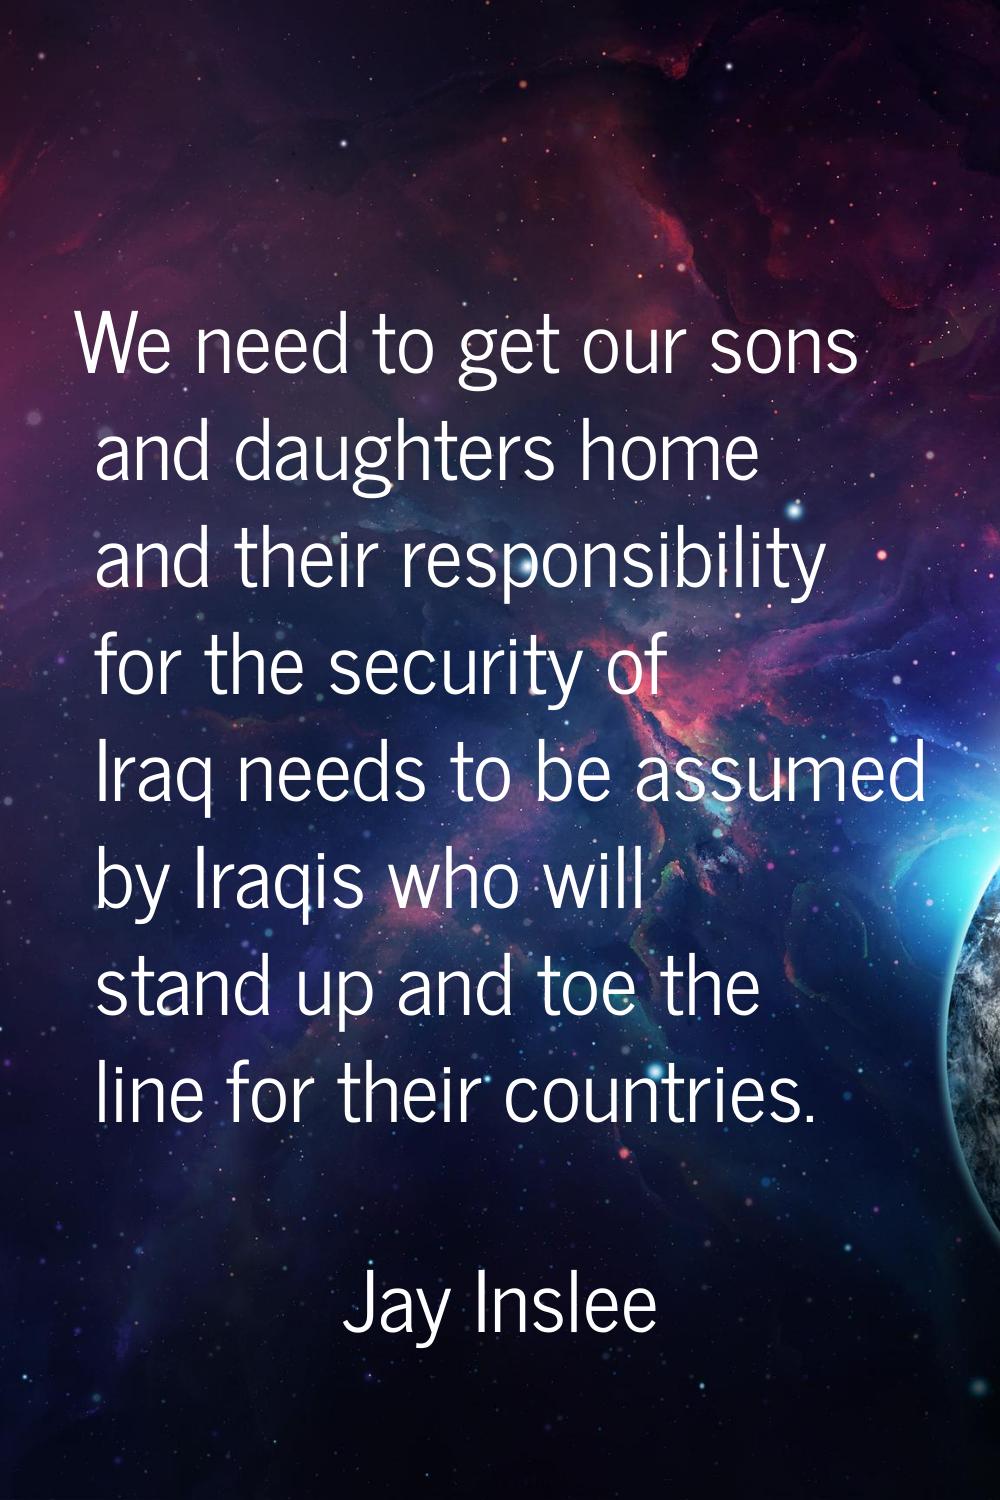 We need to get our sons and daughters home and their responsibility for the security of Iraq needs 